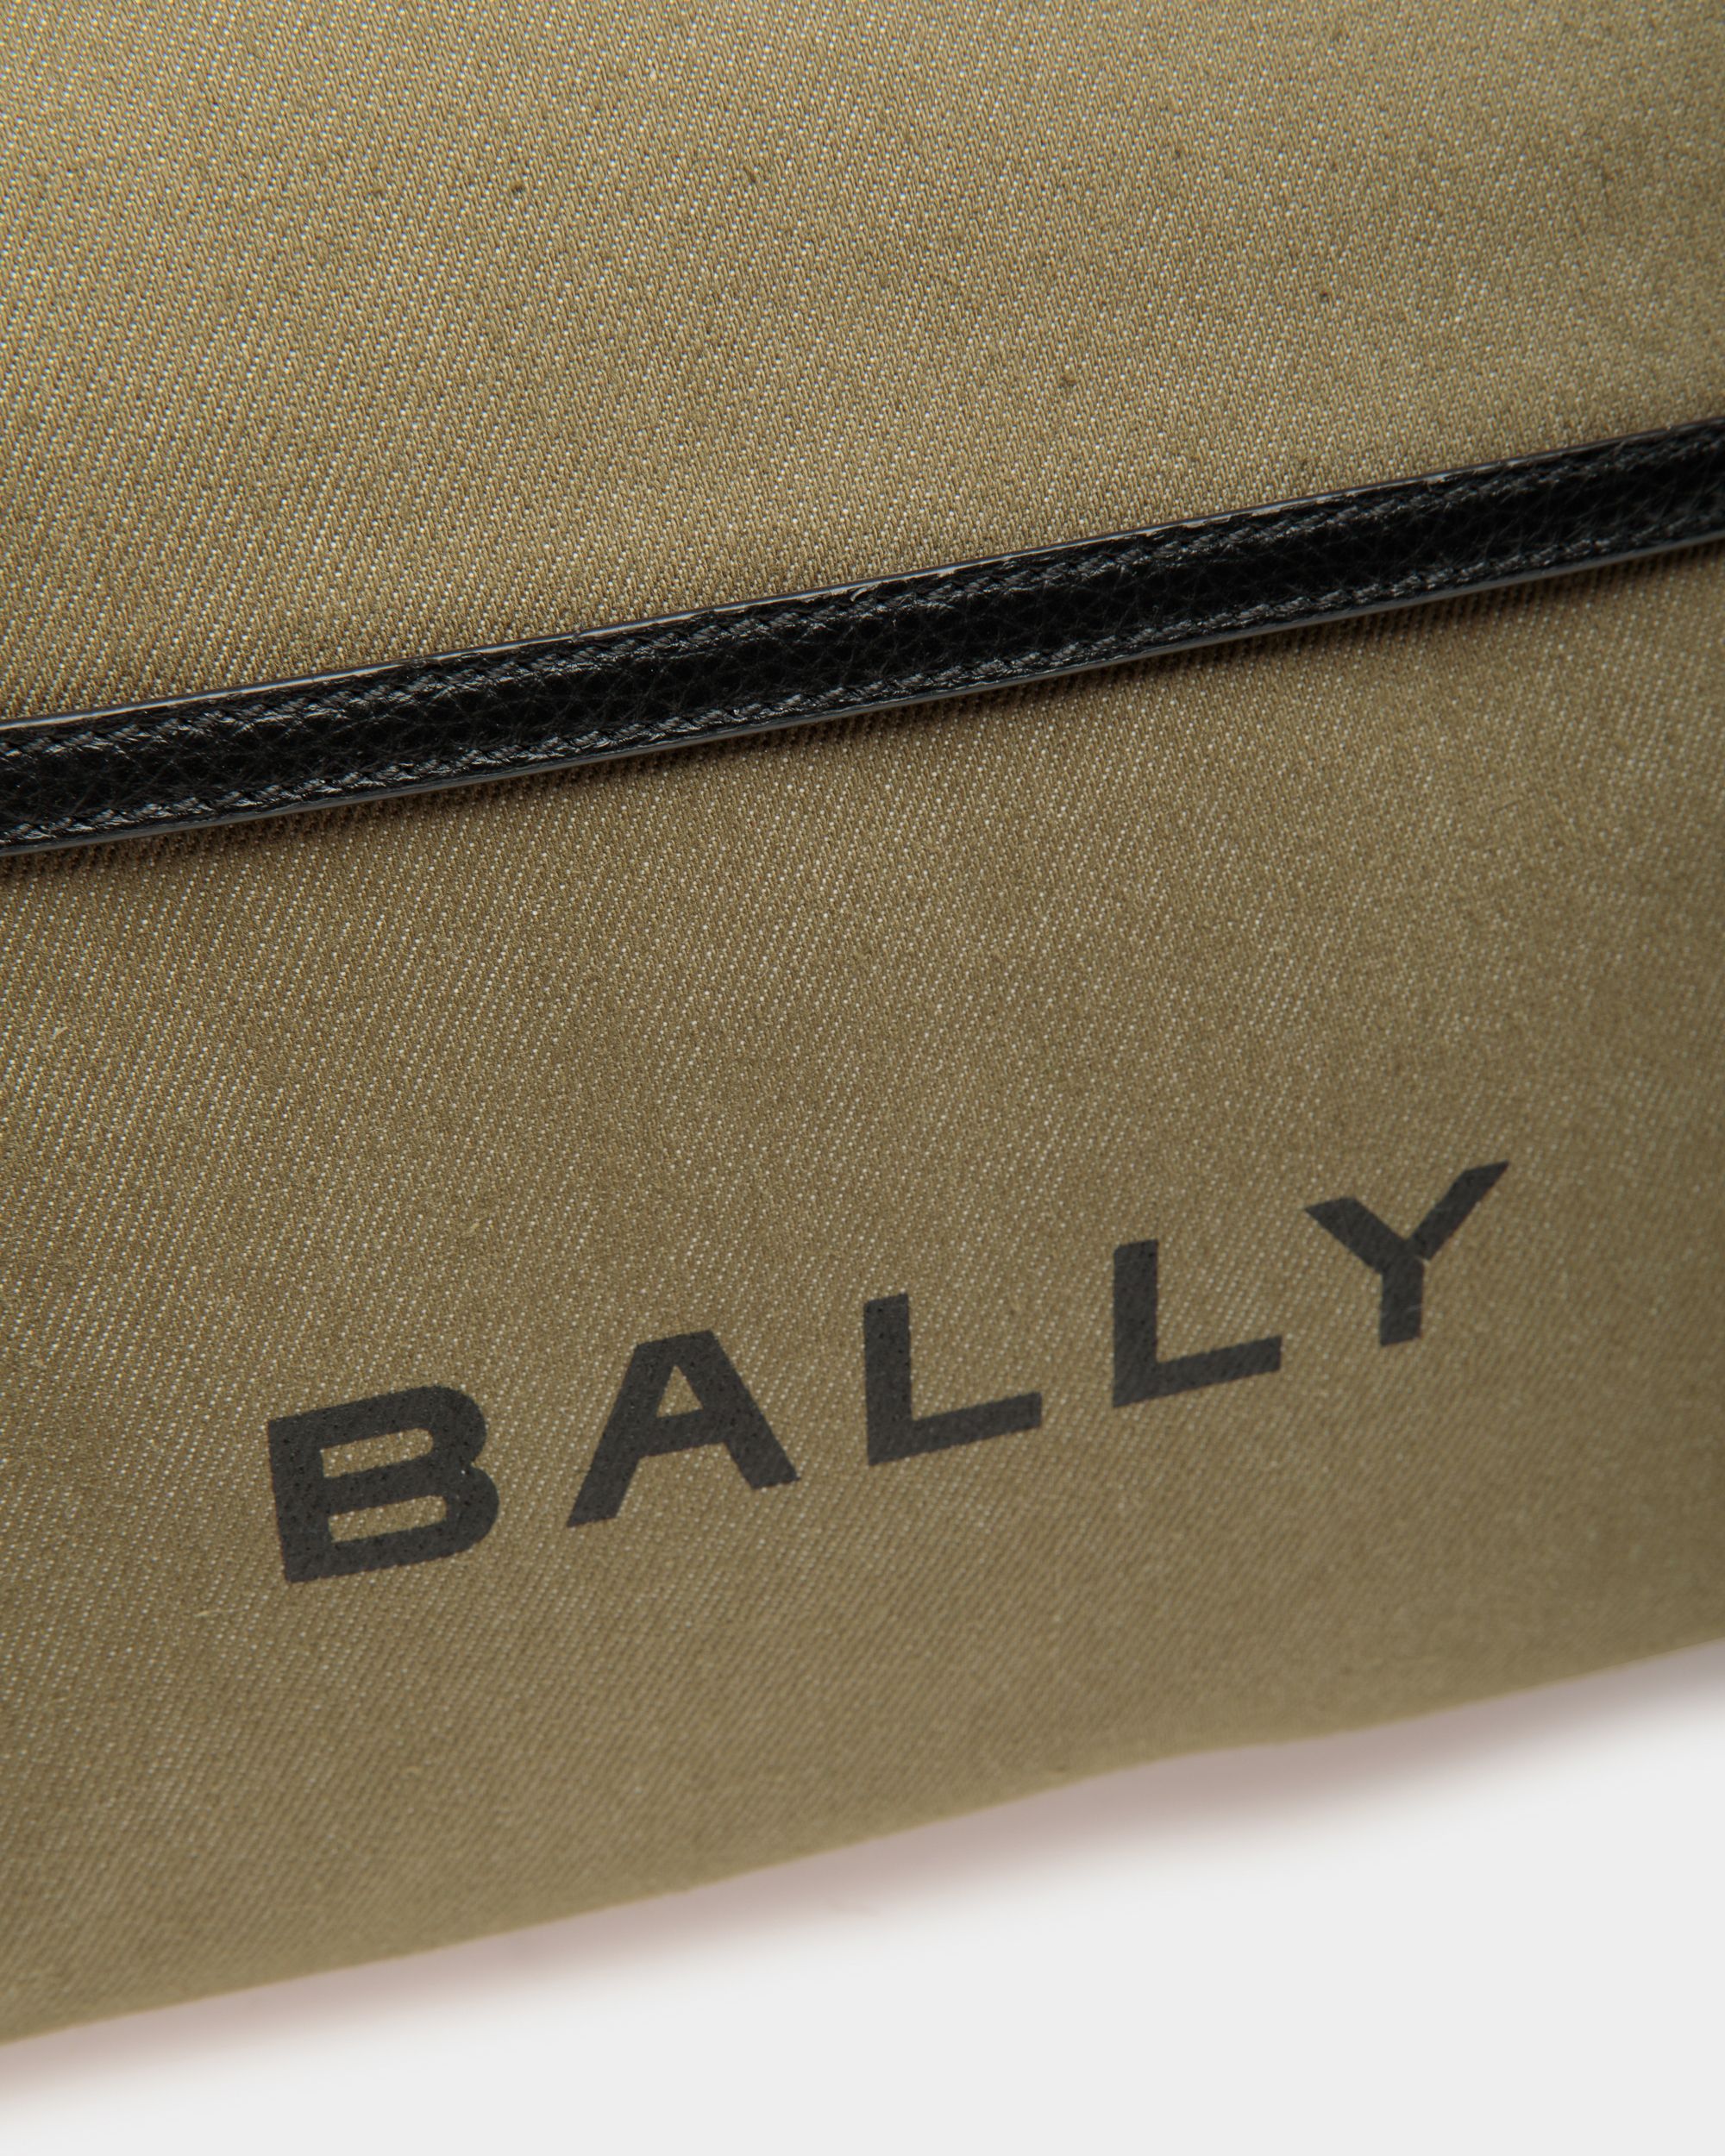 Bar | Men's Backpack in Green Canvas And Black Leather | Bally | Still Life Detail